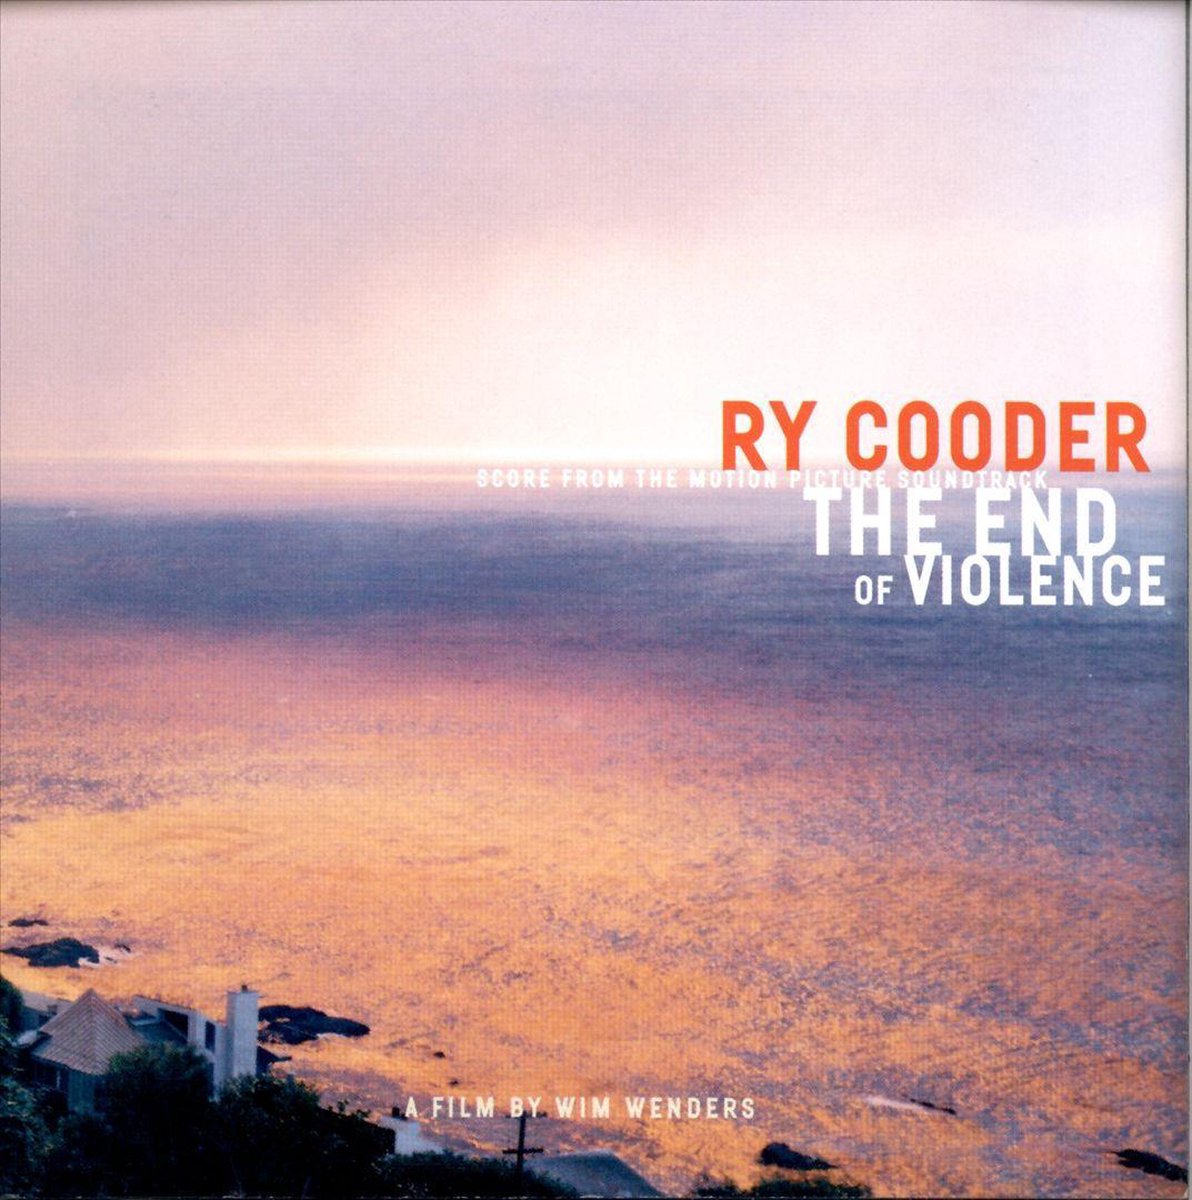 Old Shep - Ry Cooder